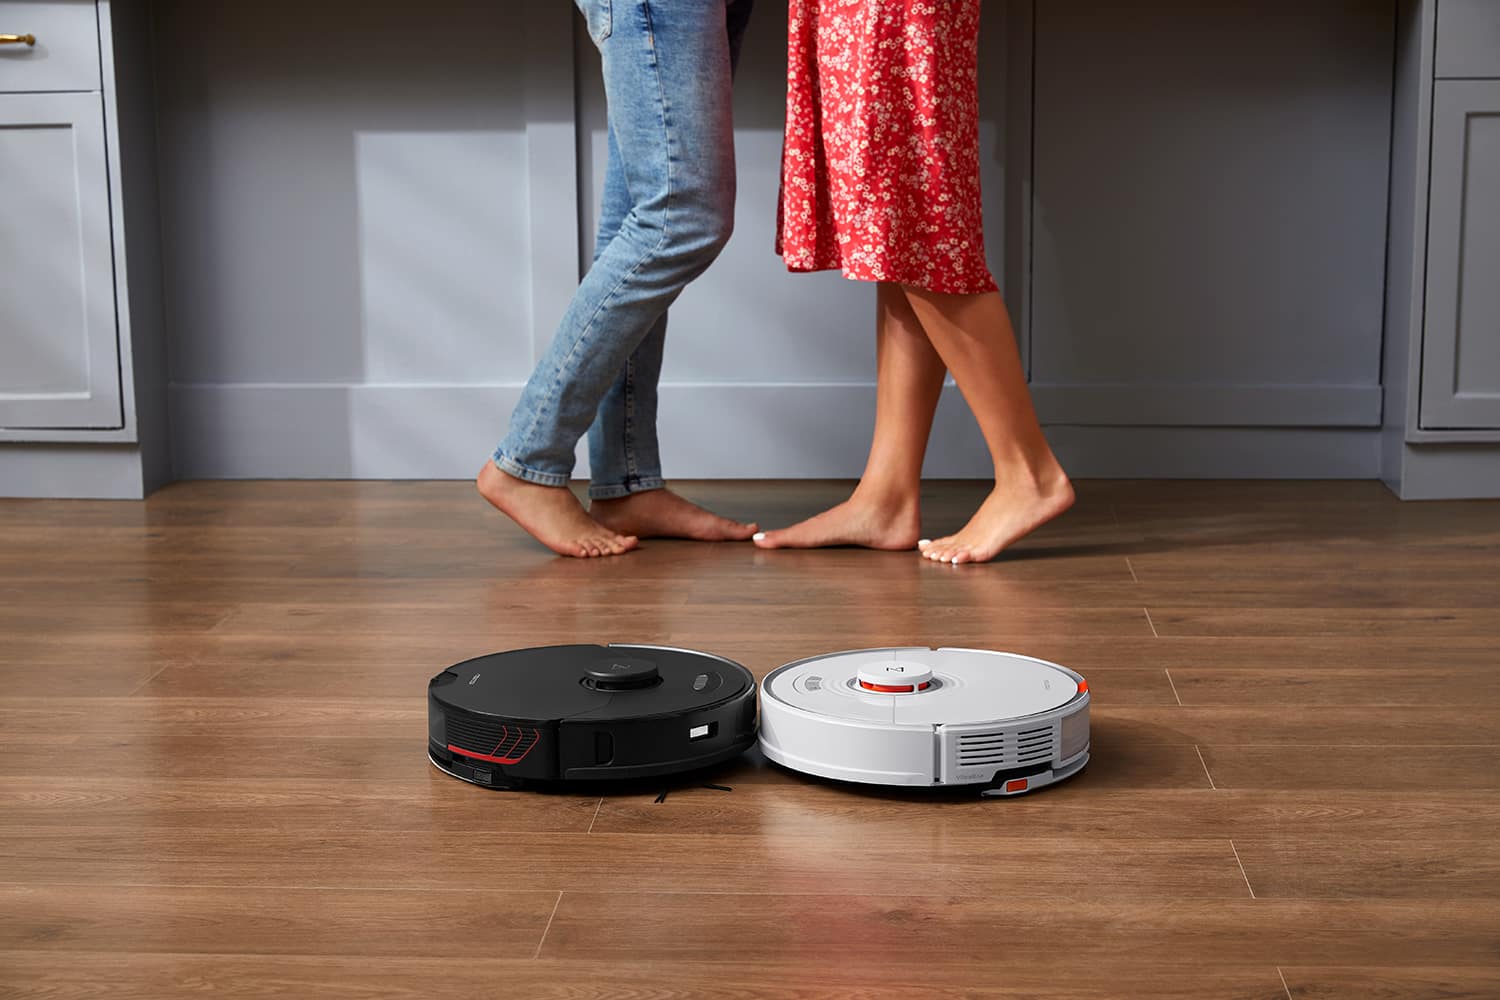 A new Cupid mode for your Roborock robot vacuums